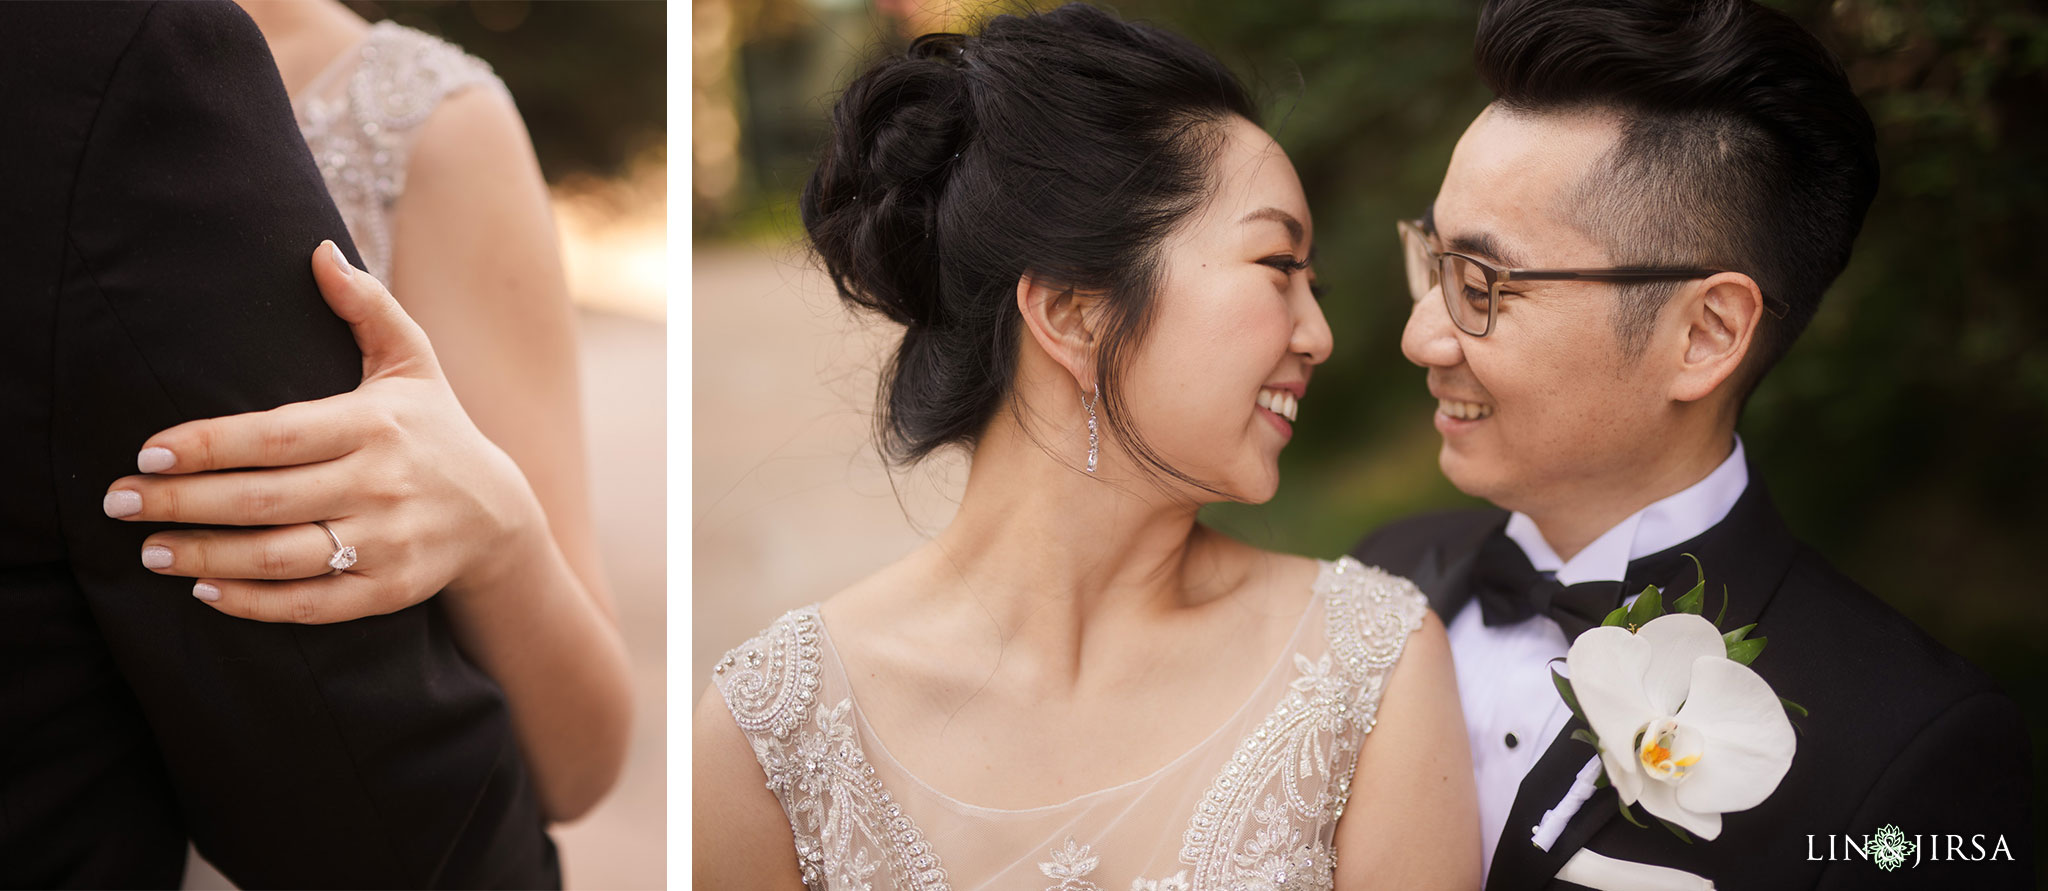 13 segerstrom center for the arts costa mesa wedding photography 1